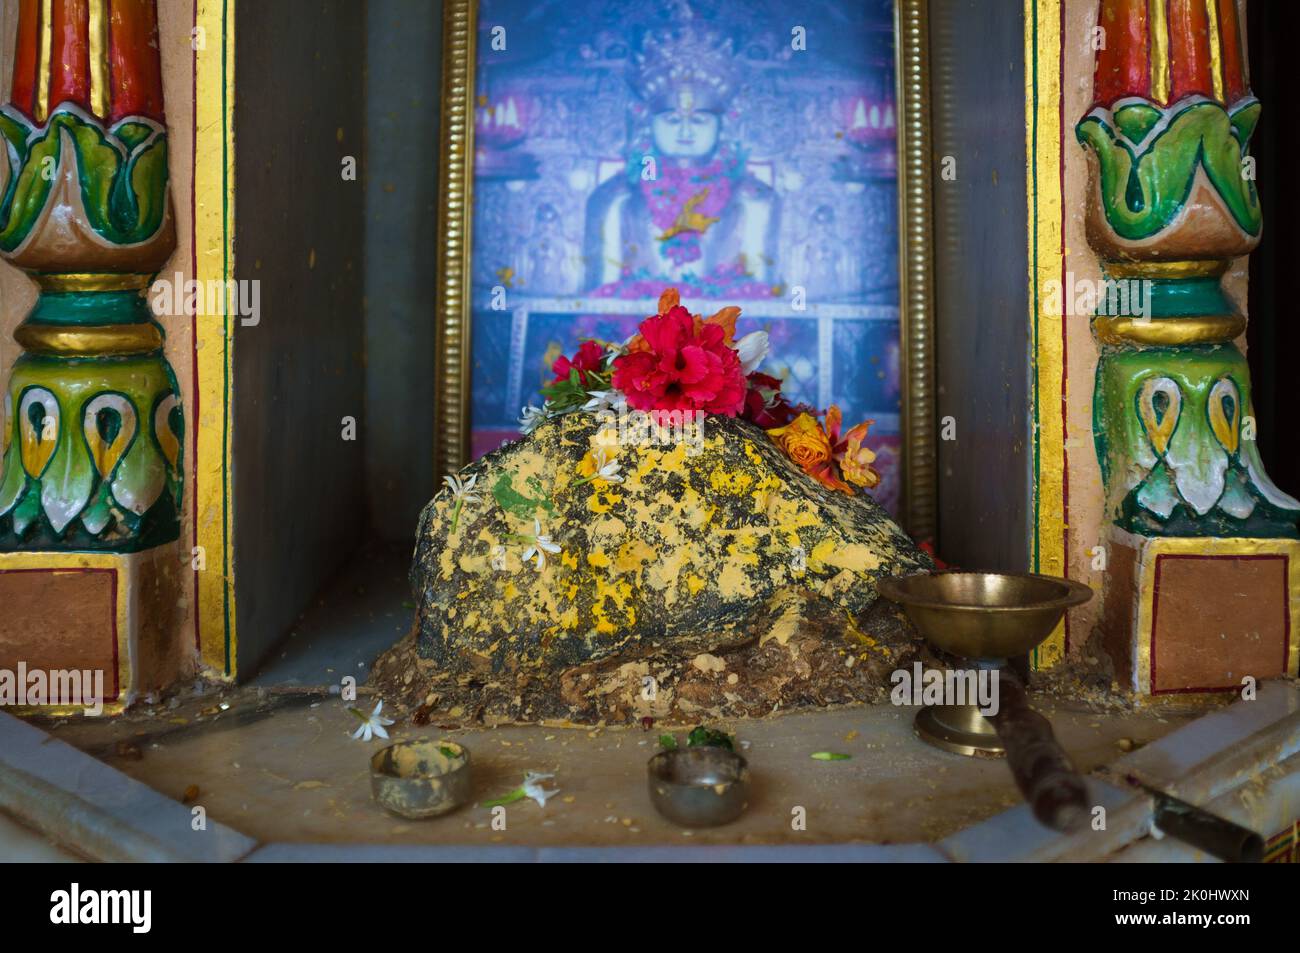 An Altar in the Jain temple in Mumbai with colorful Indian ornaments and golden pots Stock Photo